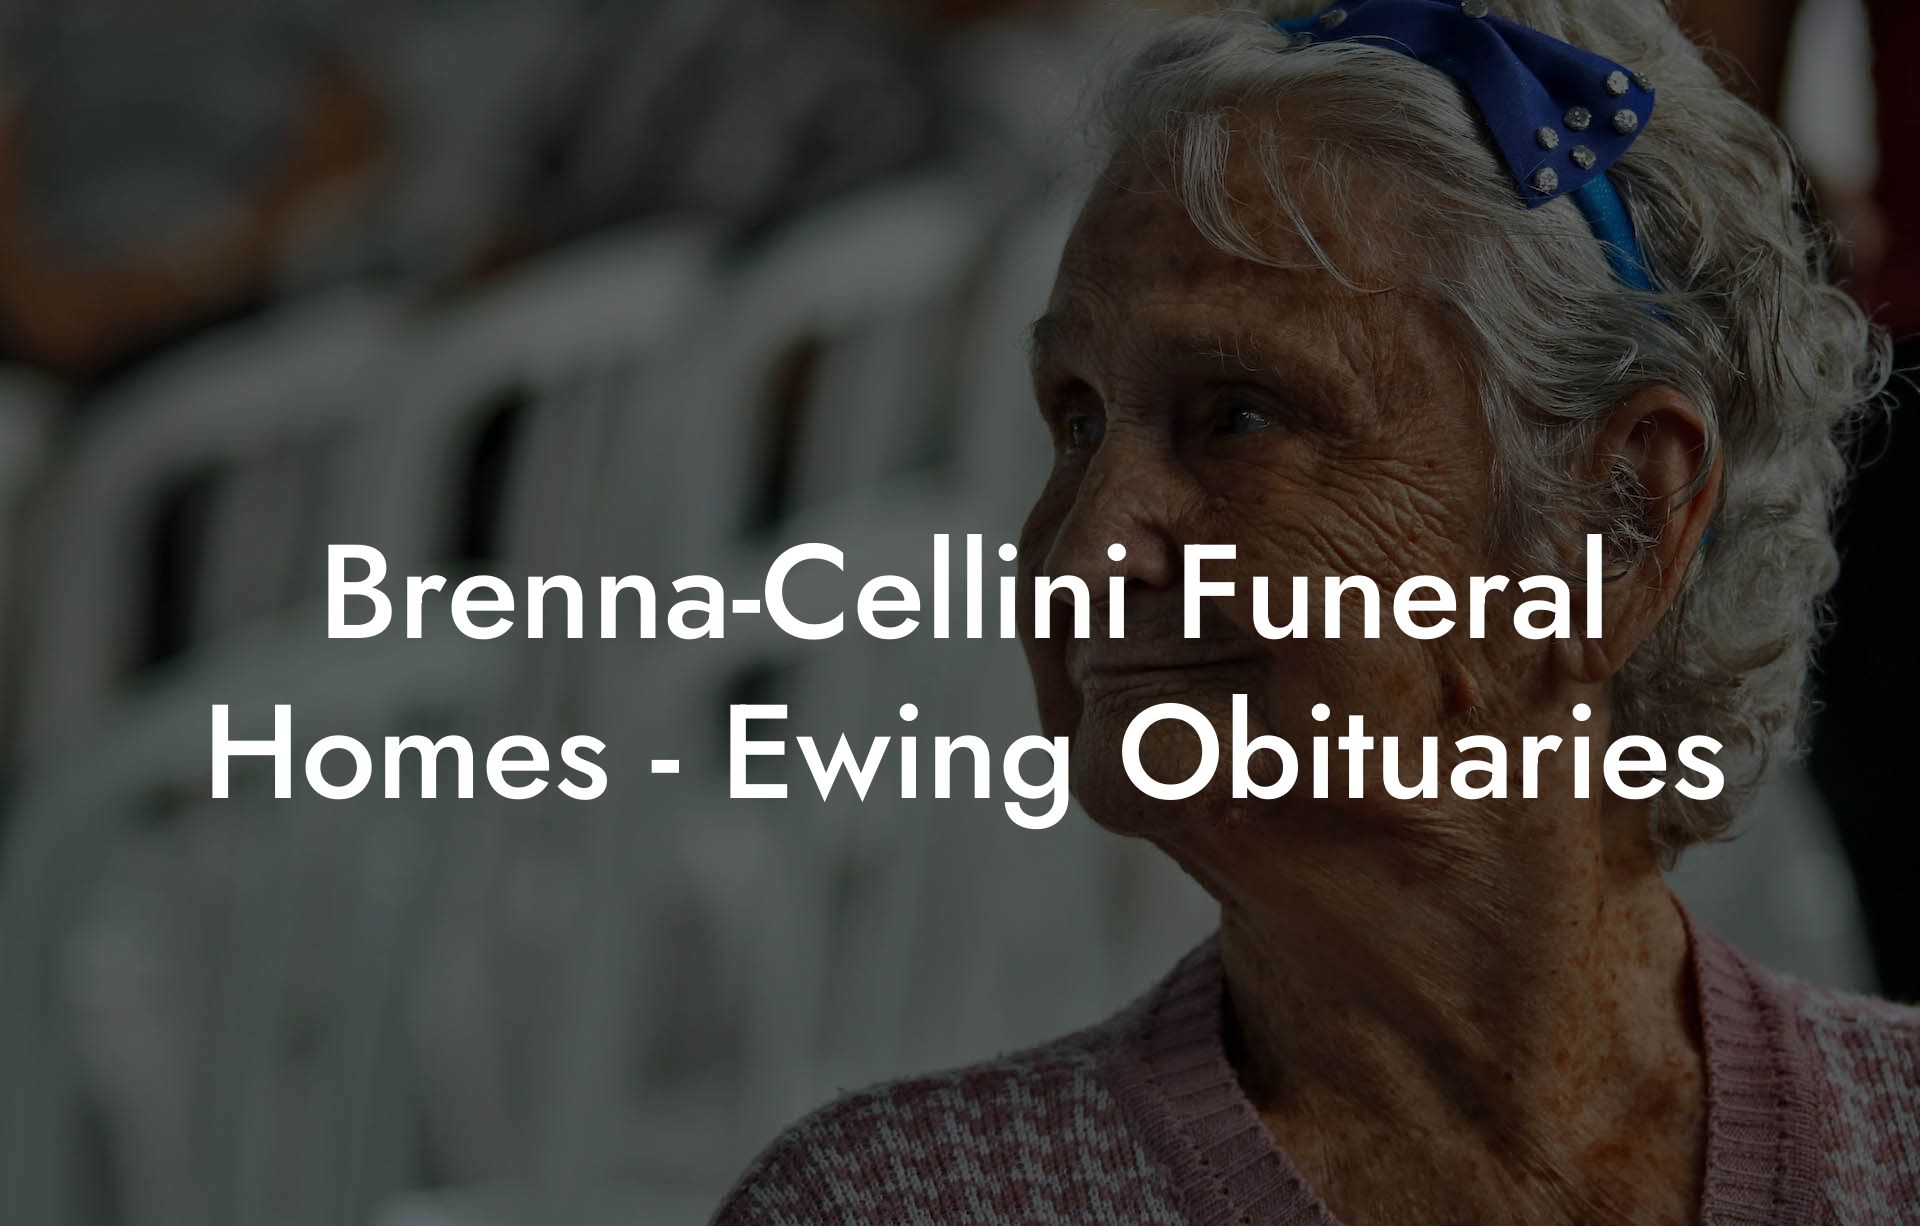 Brenna-Cellini Funeral Homes - Ewing Obituaries